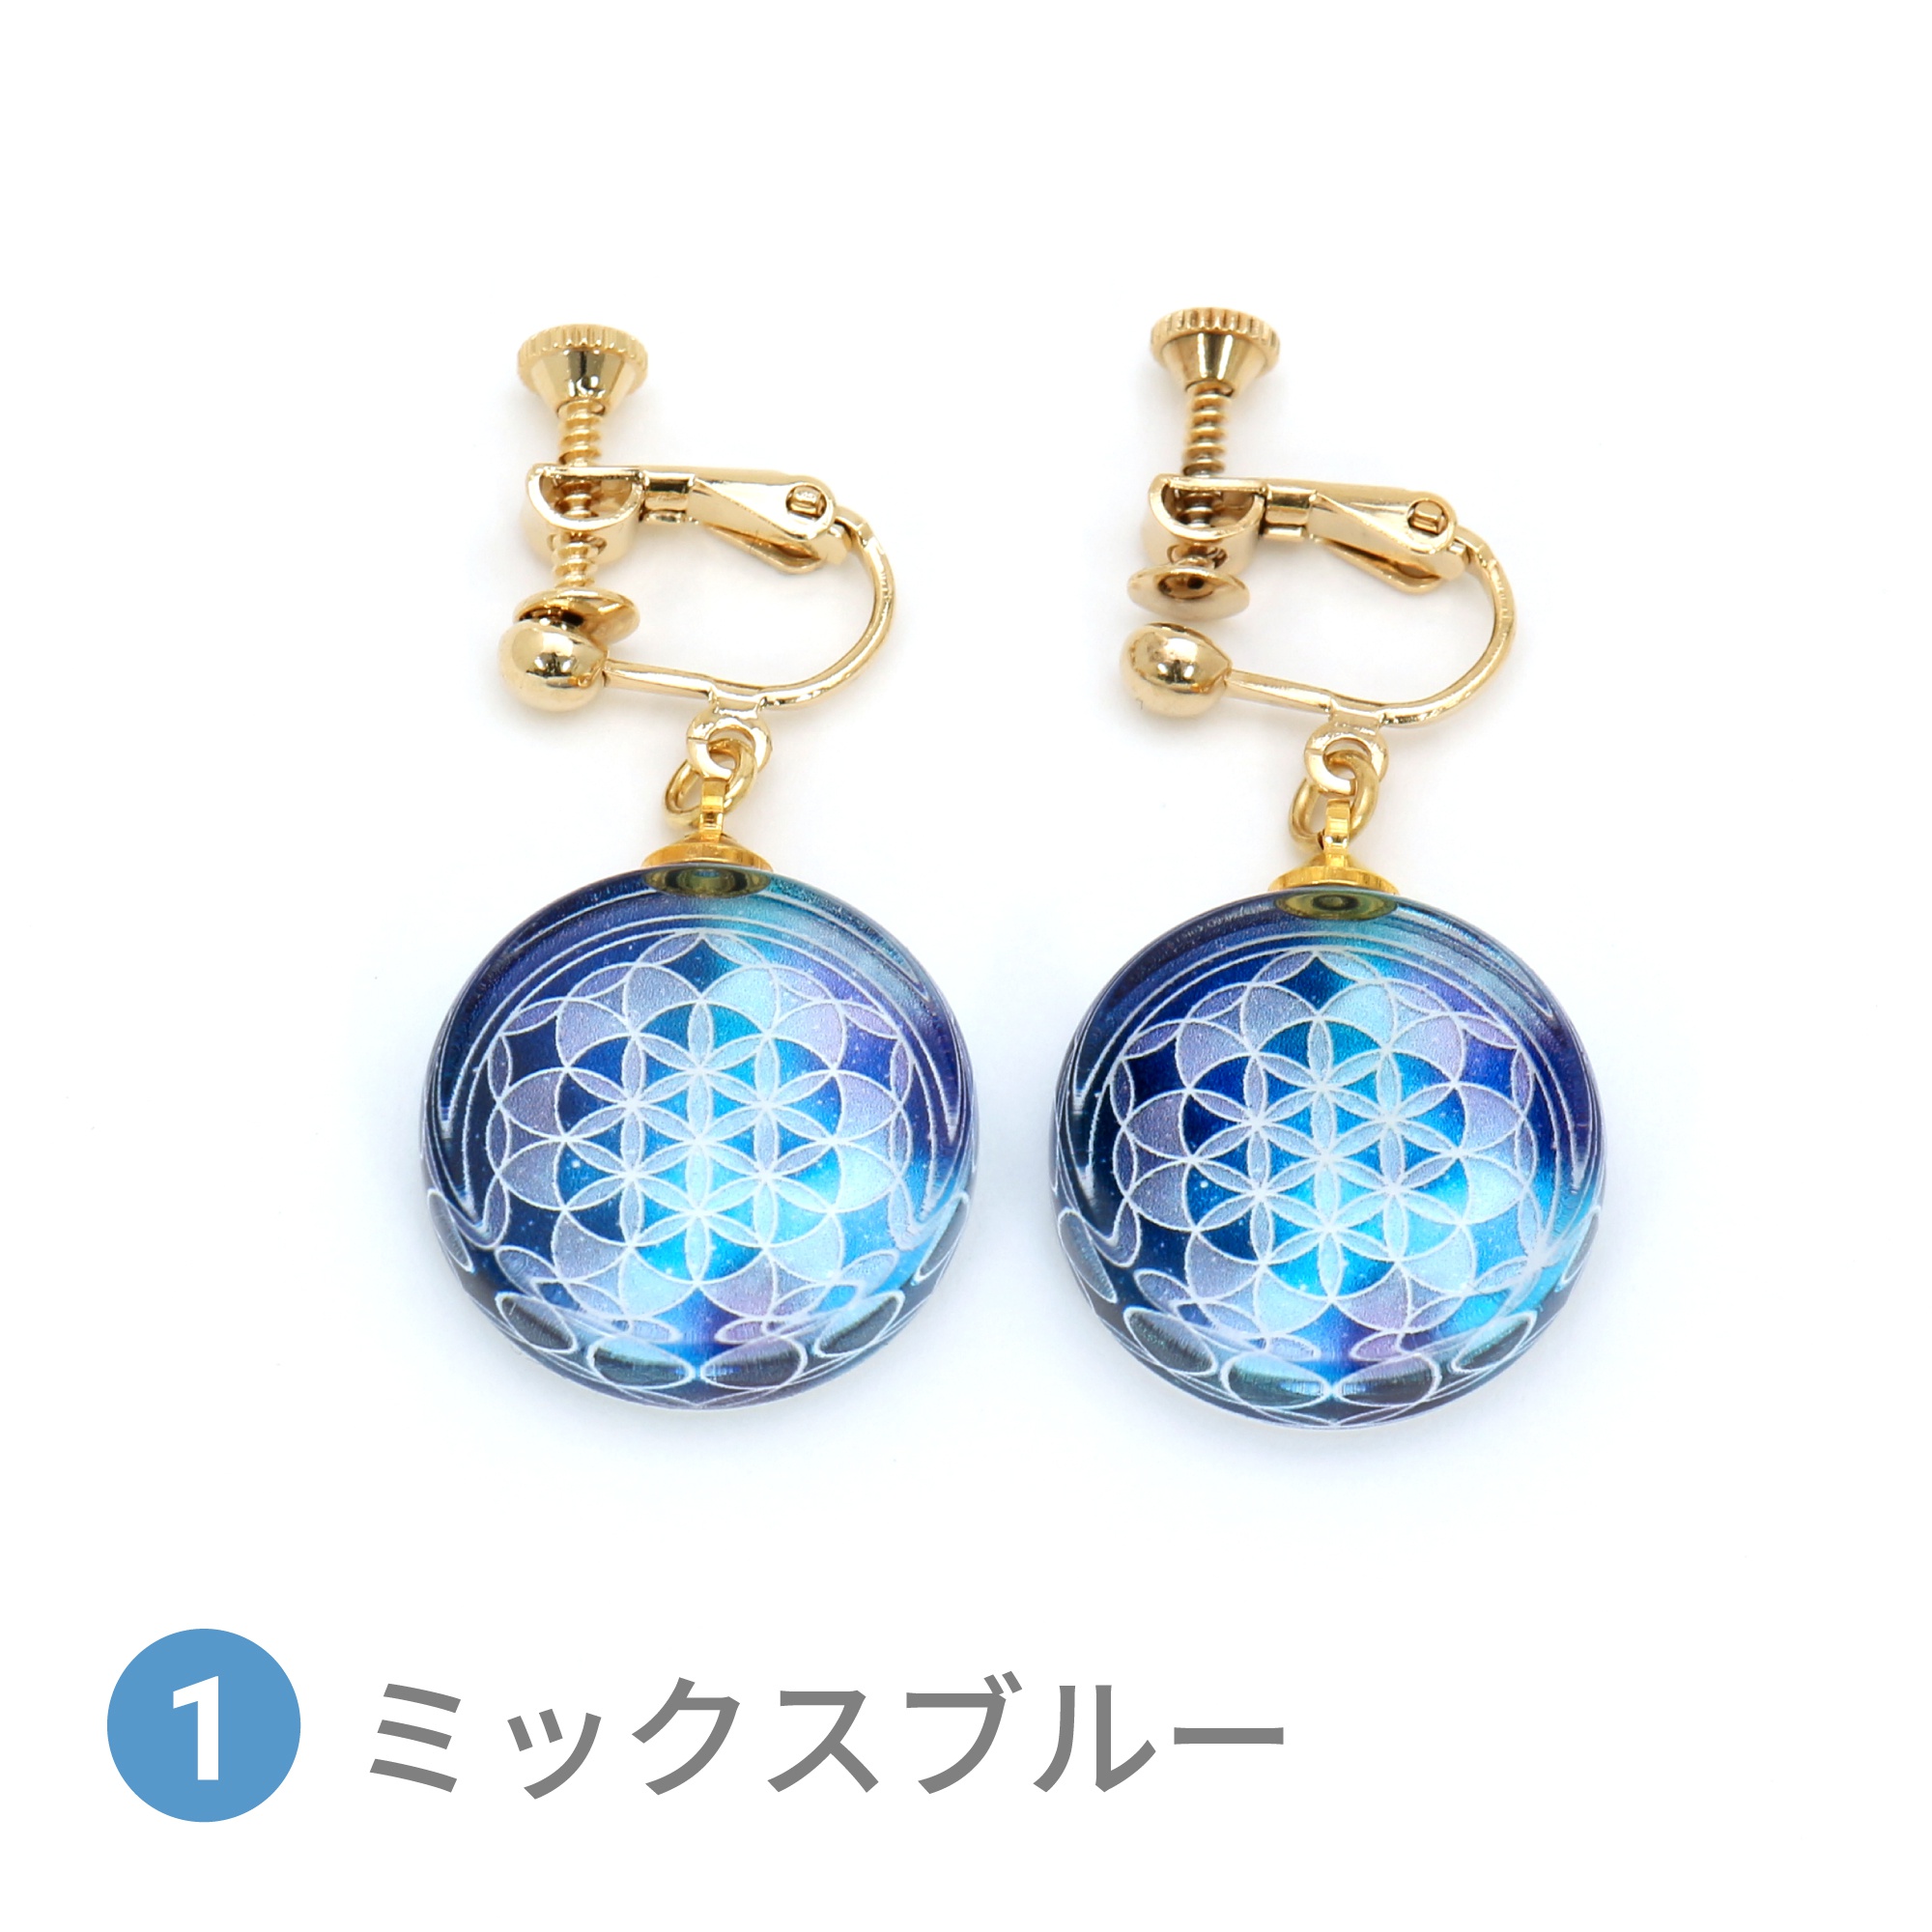 Glass accessories Earring FLOWER OF LIFE mix blue round shape